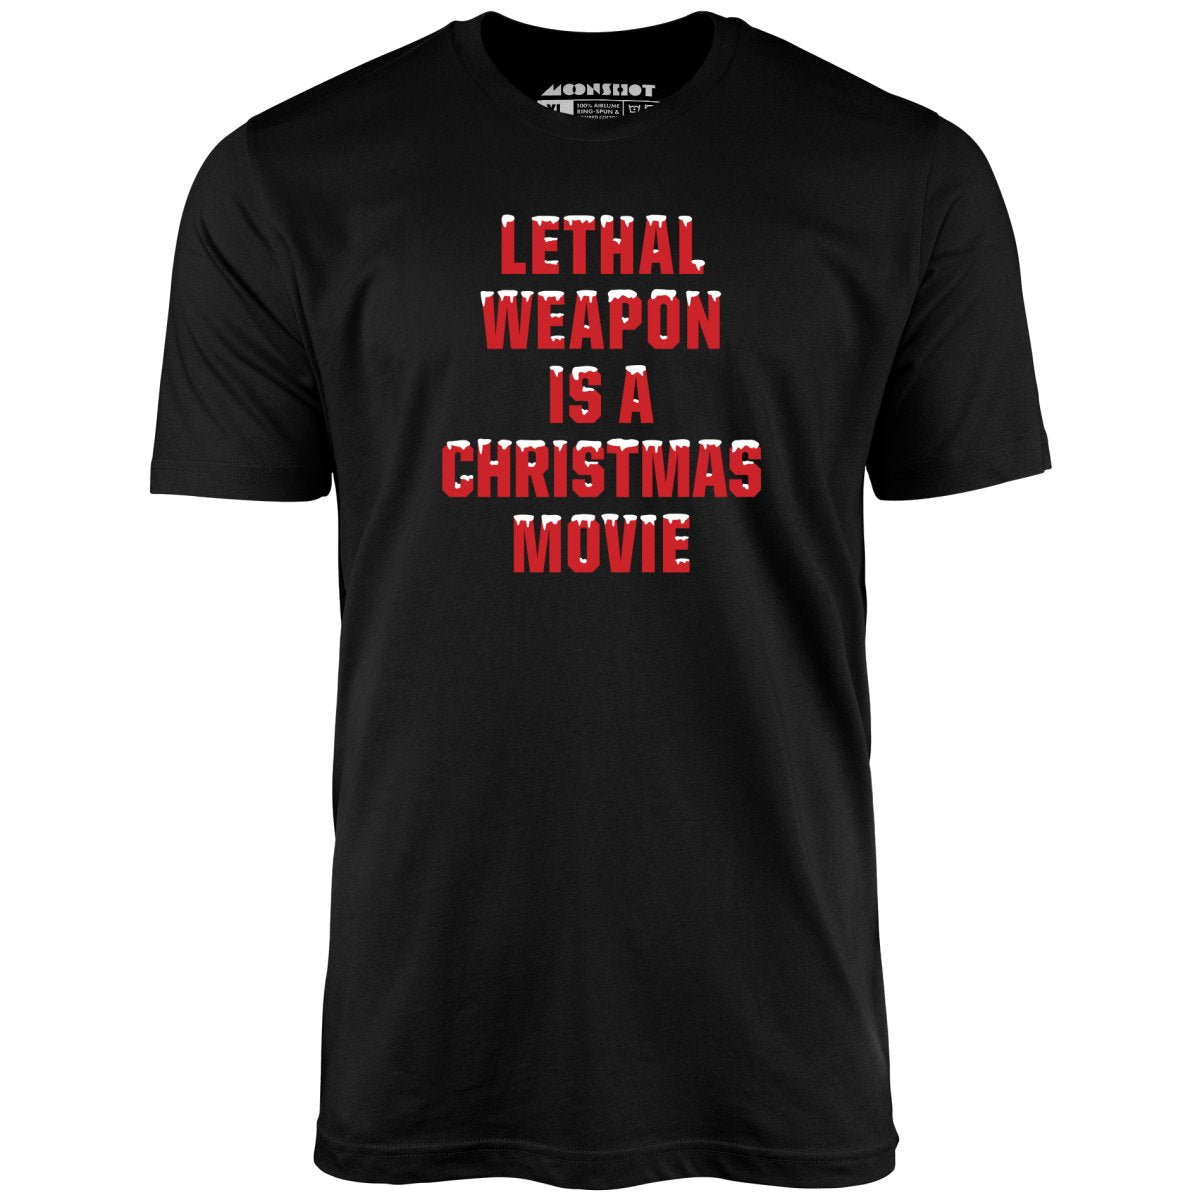 Lethal Weapon is a Christmas Movie - Unisex T-Shirt